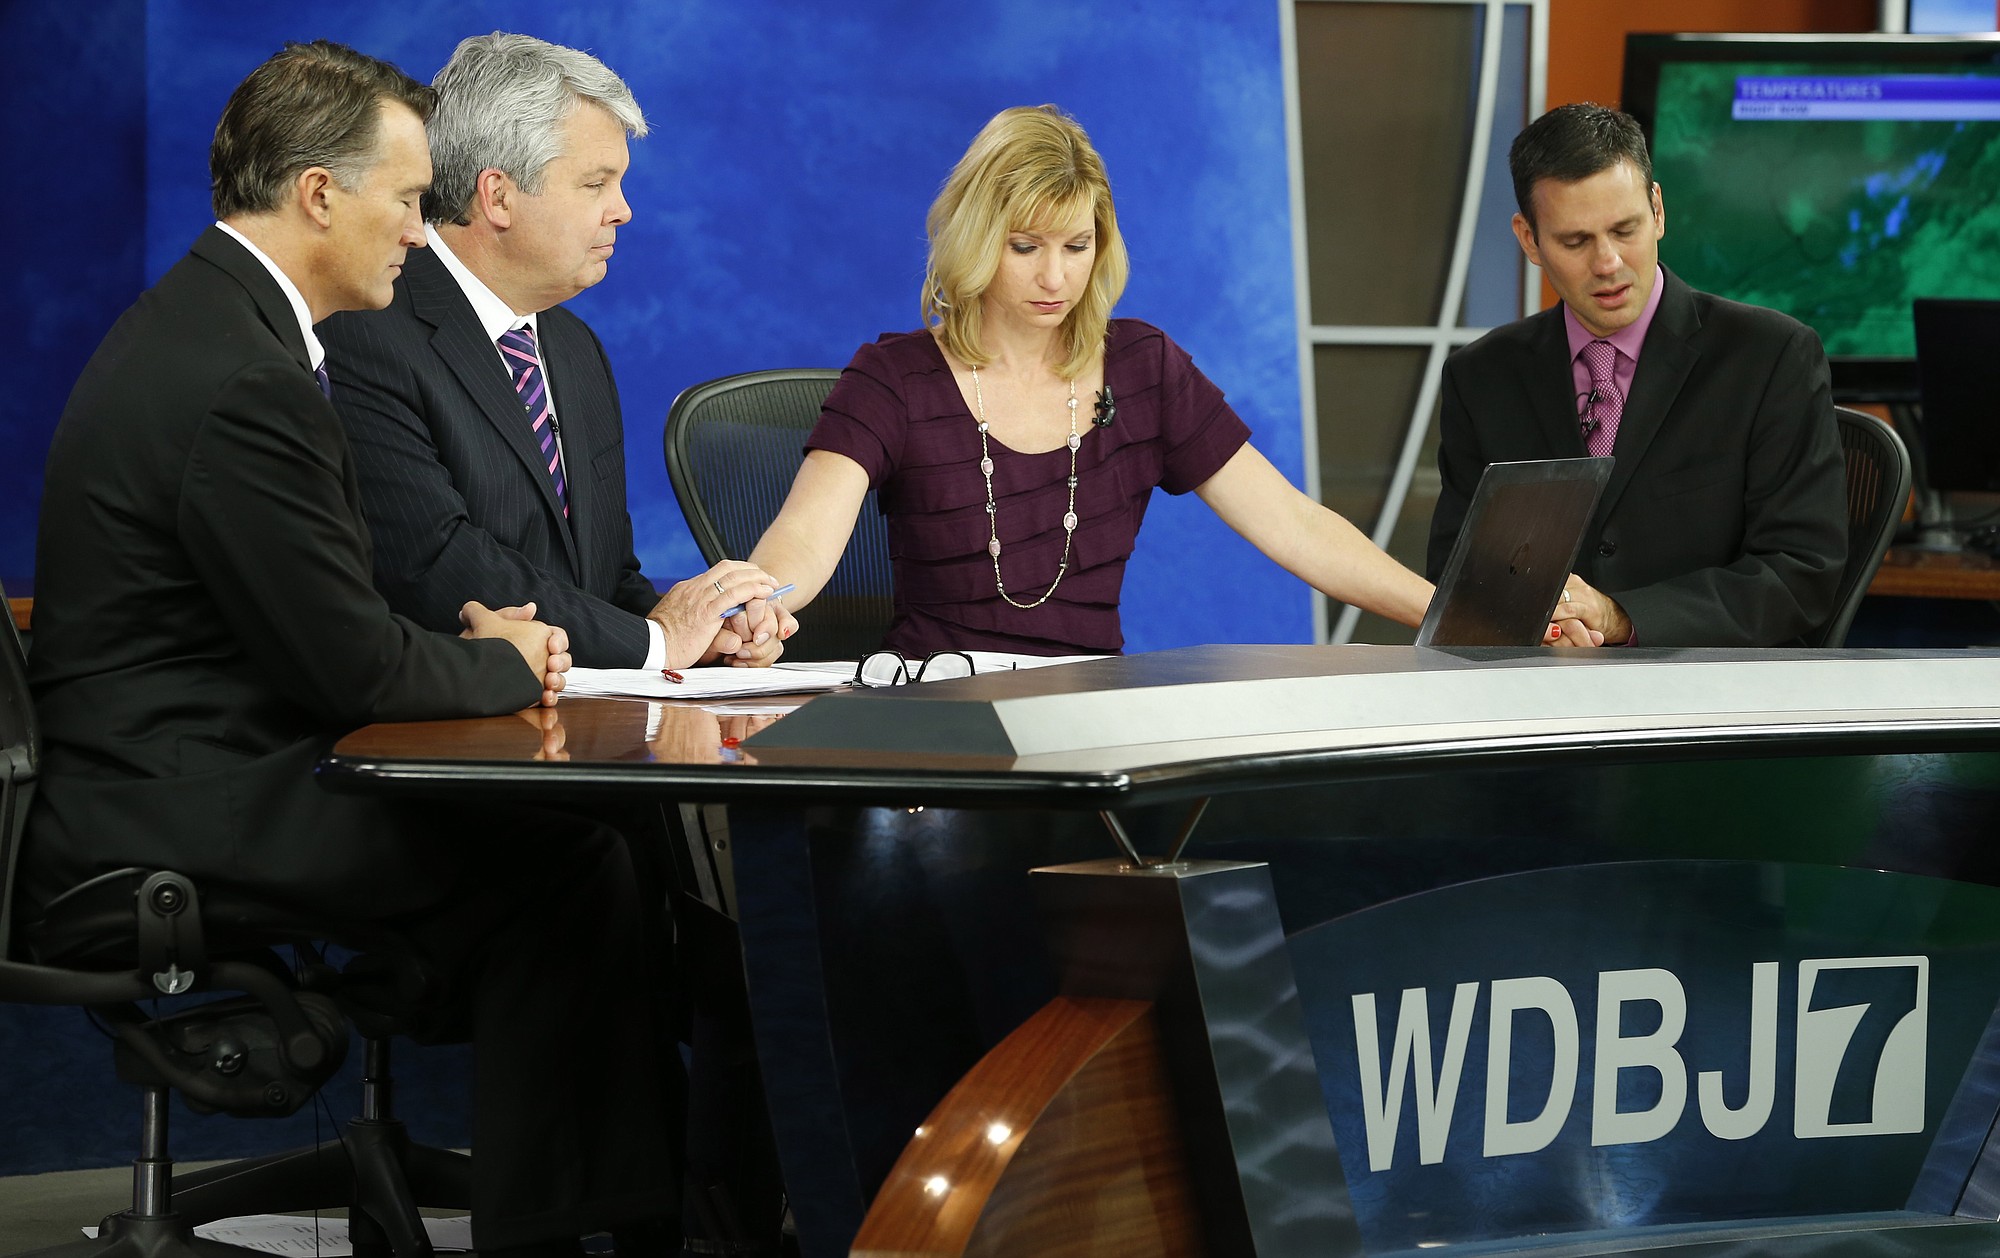 WDBJ-TV7 news morning anchor Kimberly McBroom, second from right, and meteorologist Leo Hirsbrunner, right, are joined by visiting anchor Steve Grant, second from left, and Dr. Thomas Milam, of the Carilion Clinic, as they observe a moment of silence during the early morning newscast Thursday at the station, in Roanoke, Va.